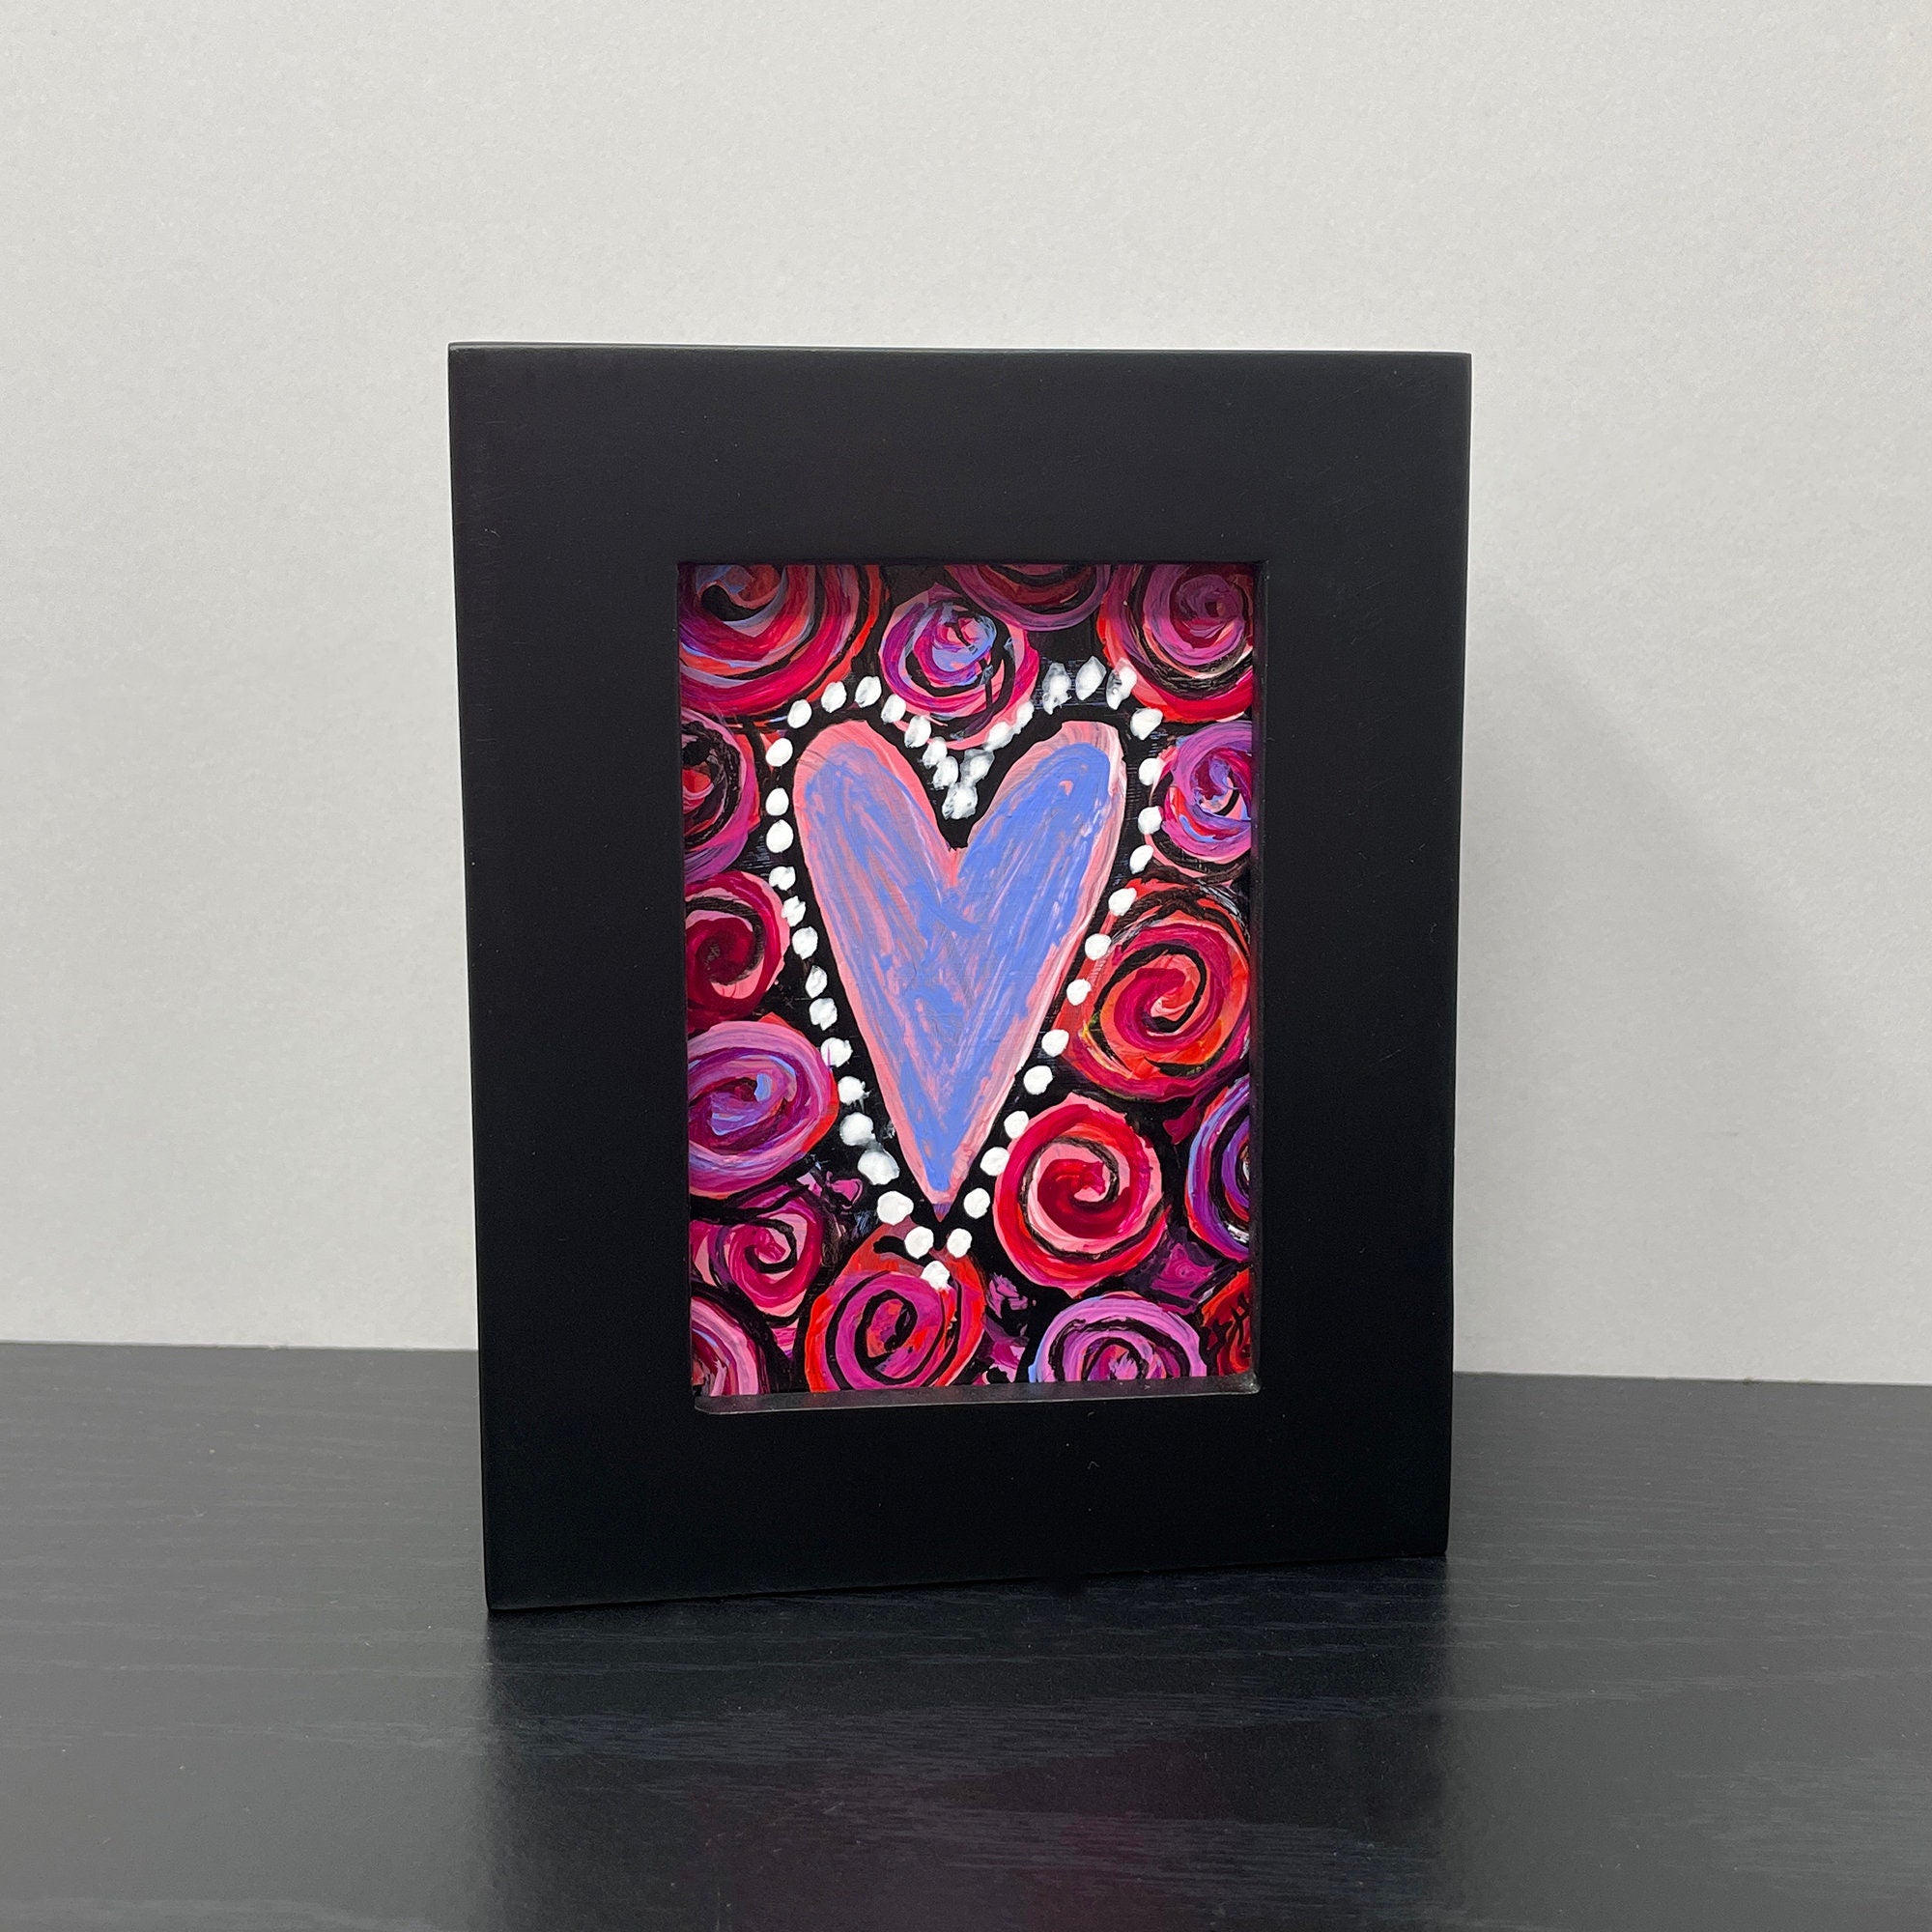 Small Original Heart Painting with Roses - Mini Love Art - Gift for Valentine's Day or Anniversary - Miniature Framed Painting